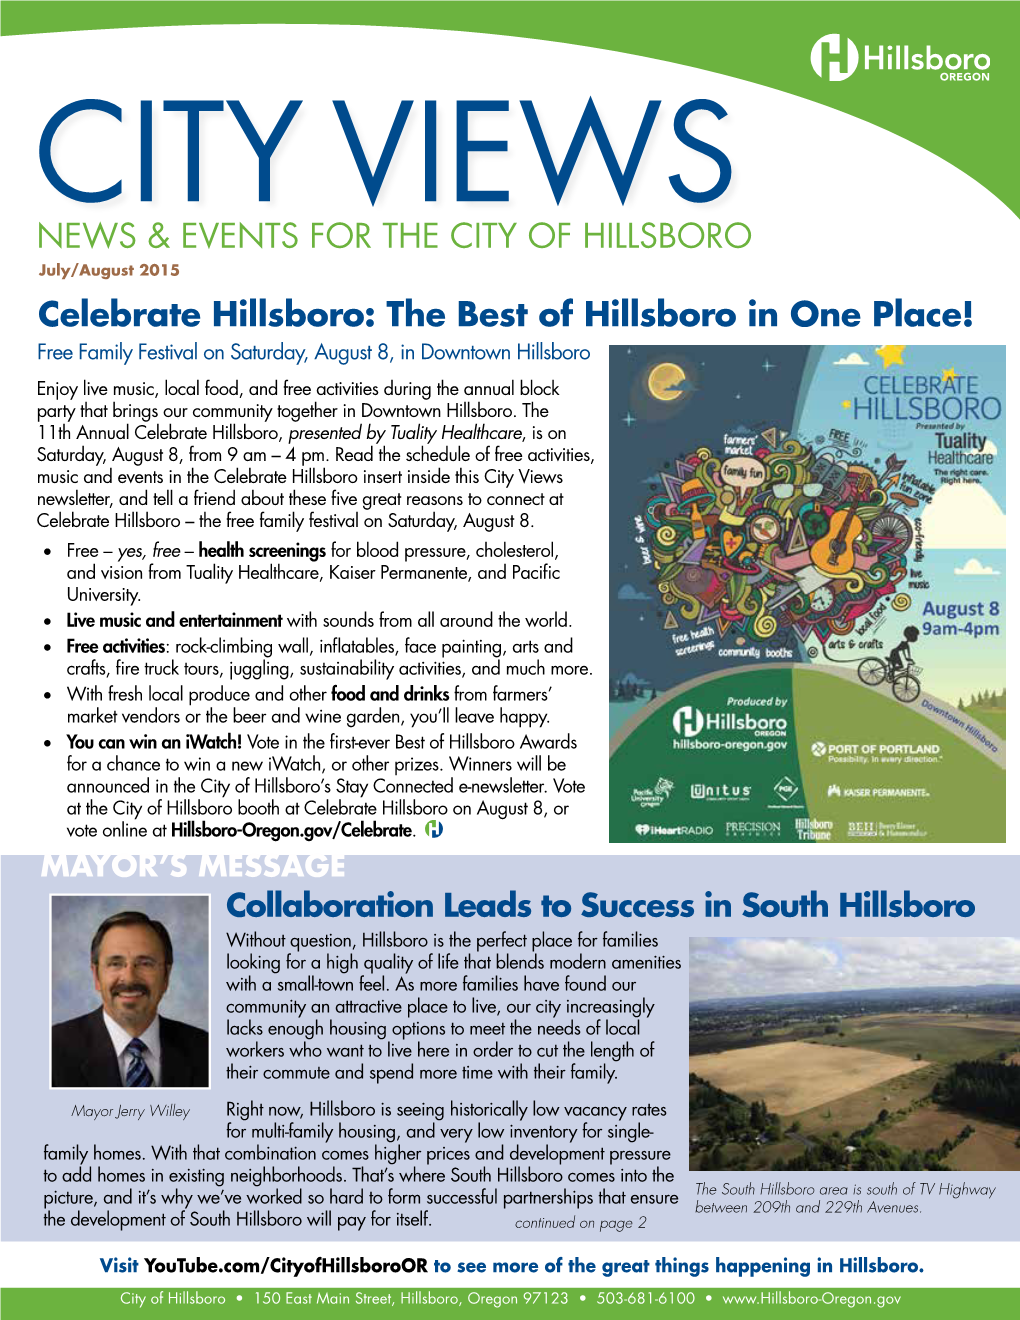 News & Events for the City of Hillsboro